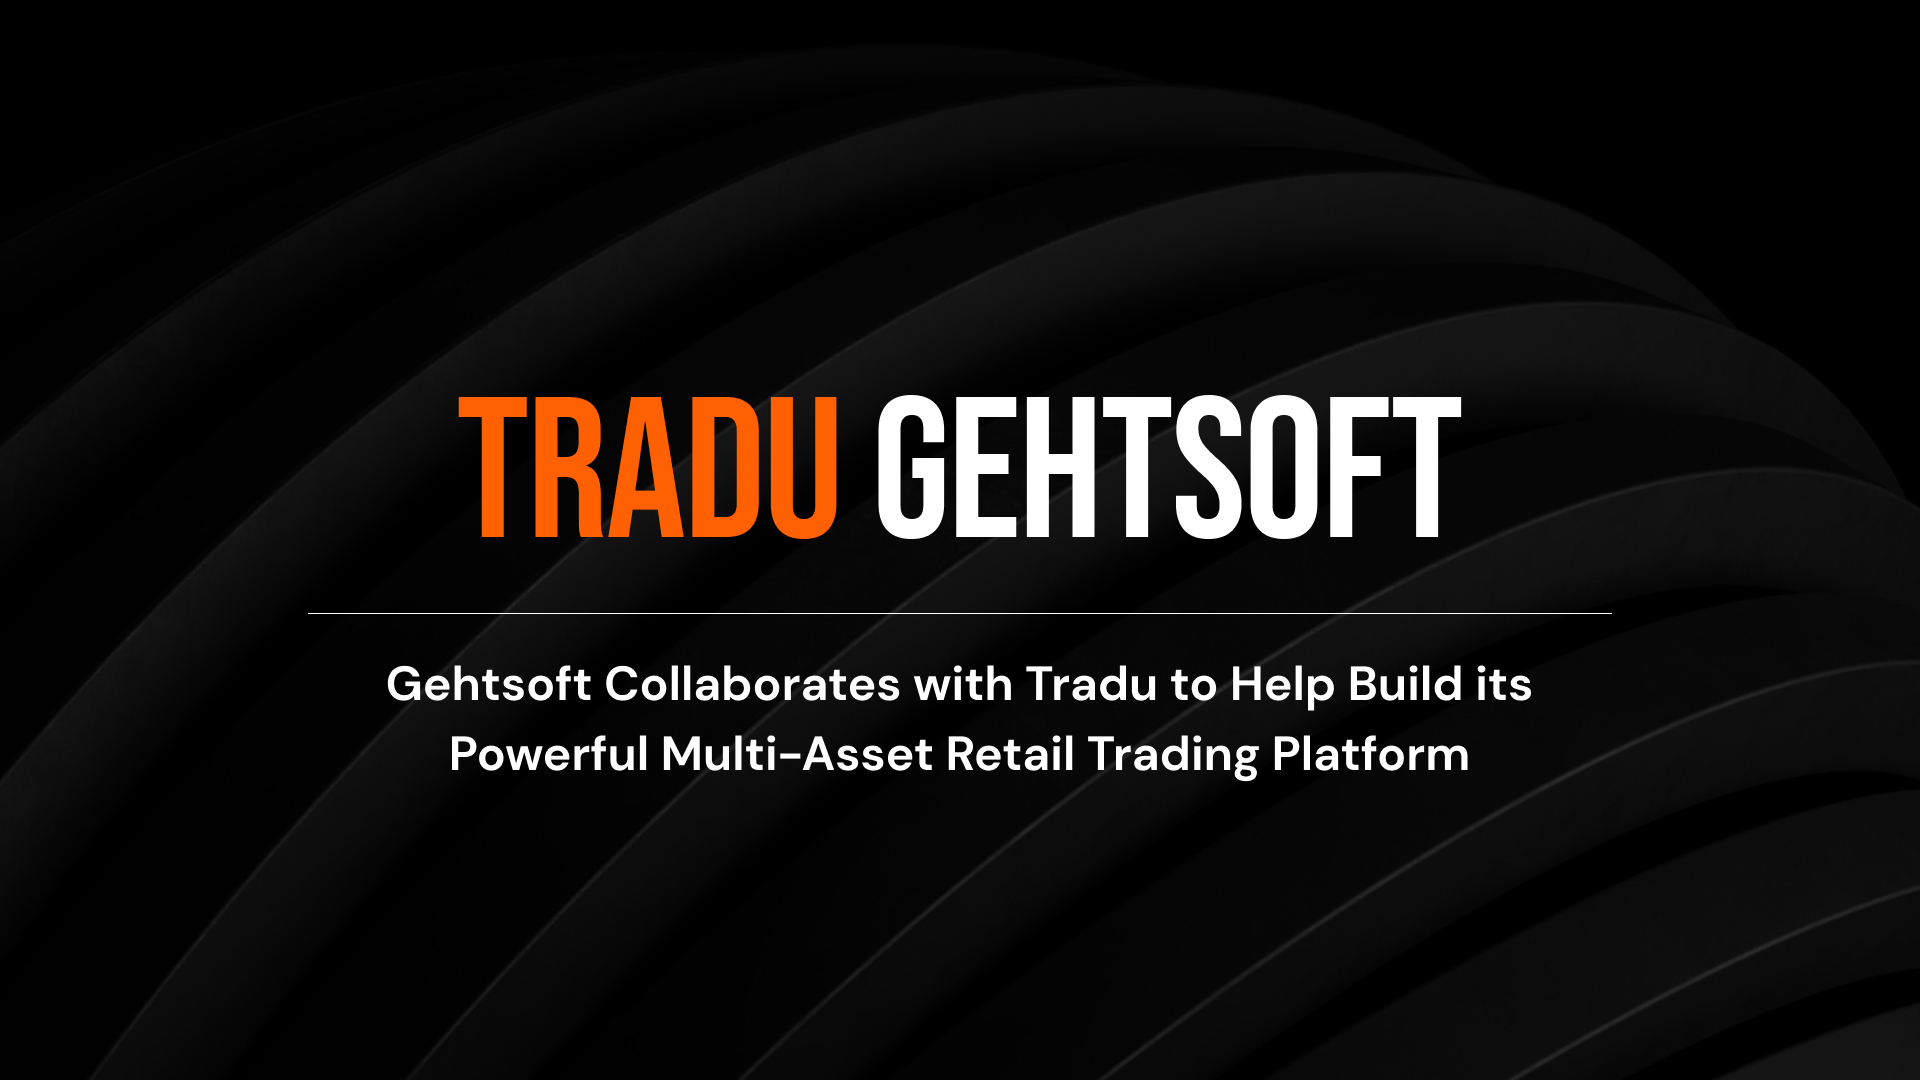 Gehtsoft Collaborates with Tradu to Help Build its Powerful Multi-Asset Retail Trading Platform